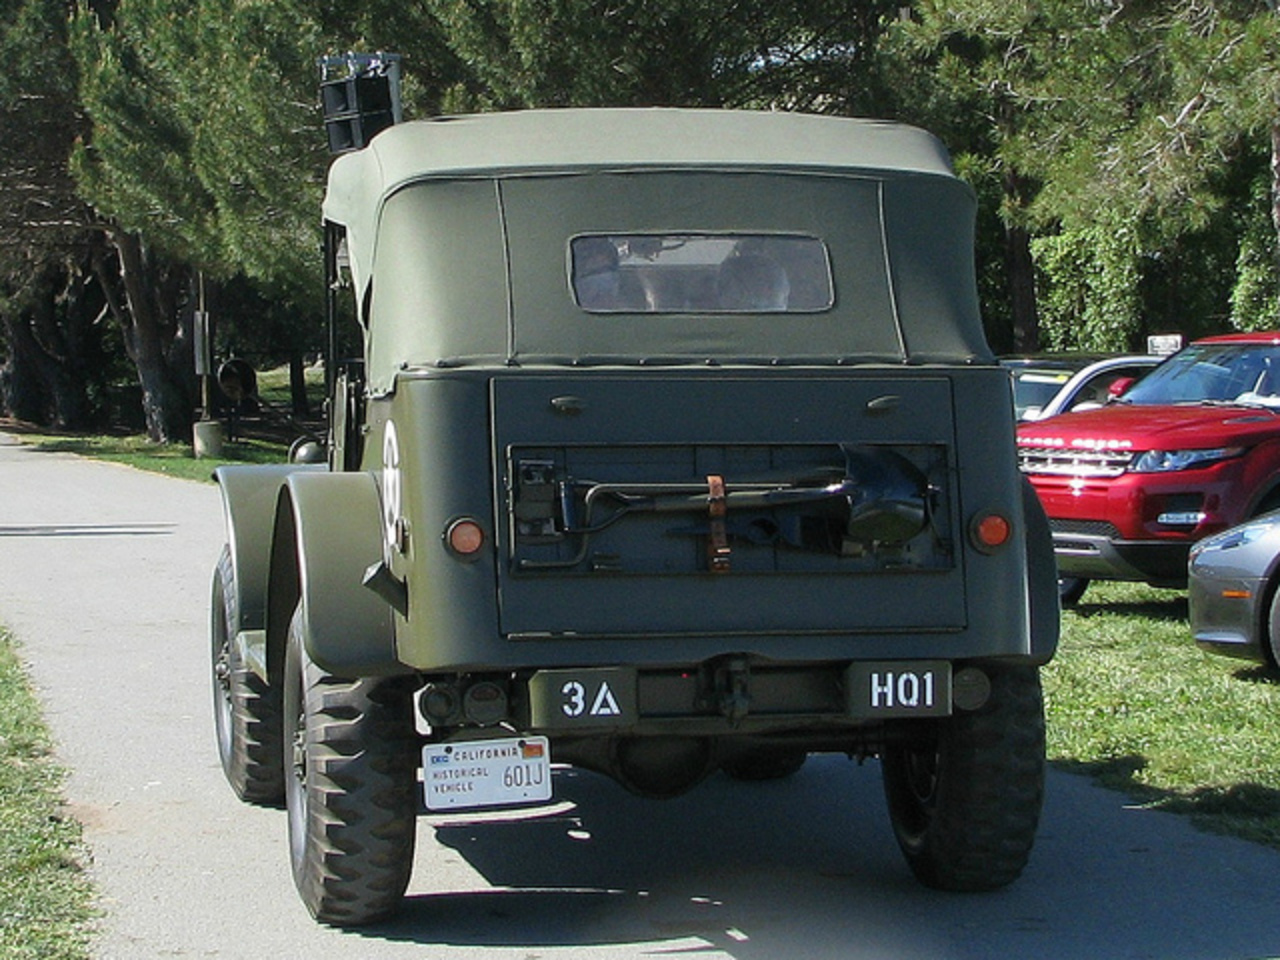 1944 Dodge WC 56 Command Car 4 | Flickr - Photo Sharing!